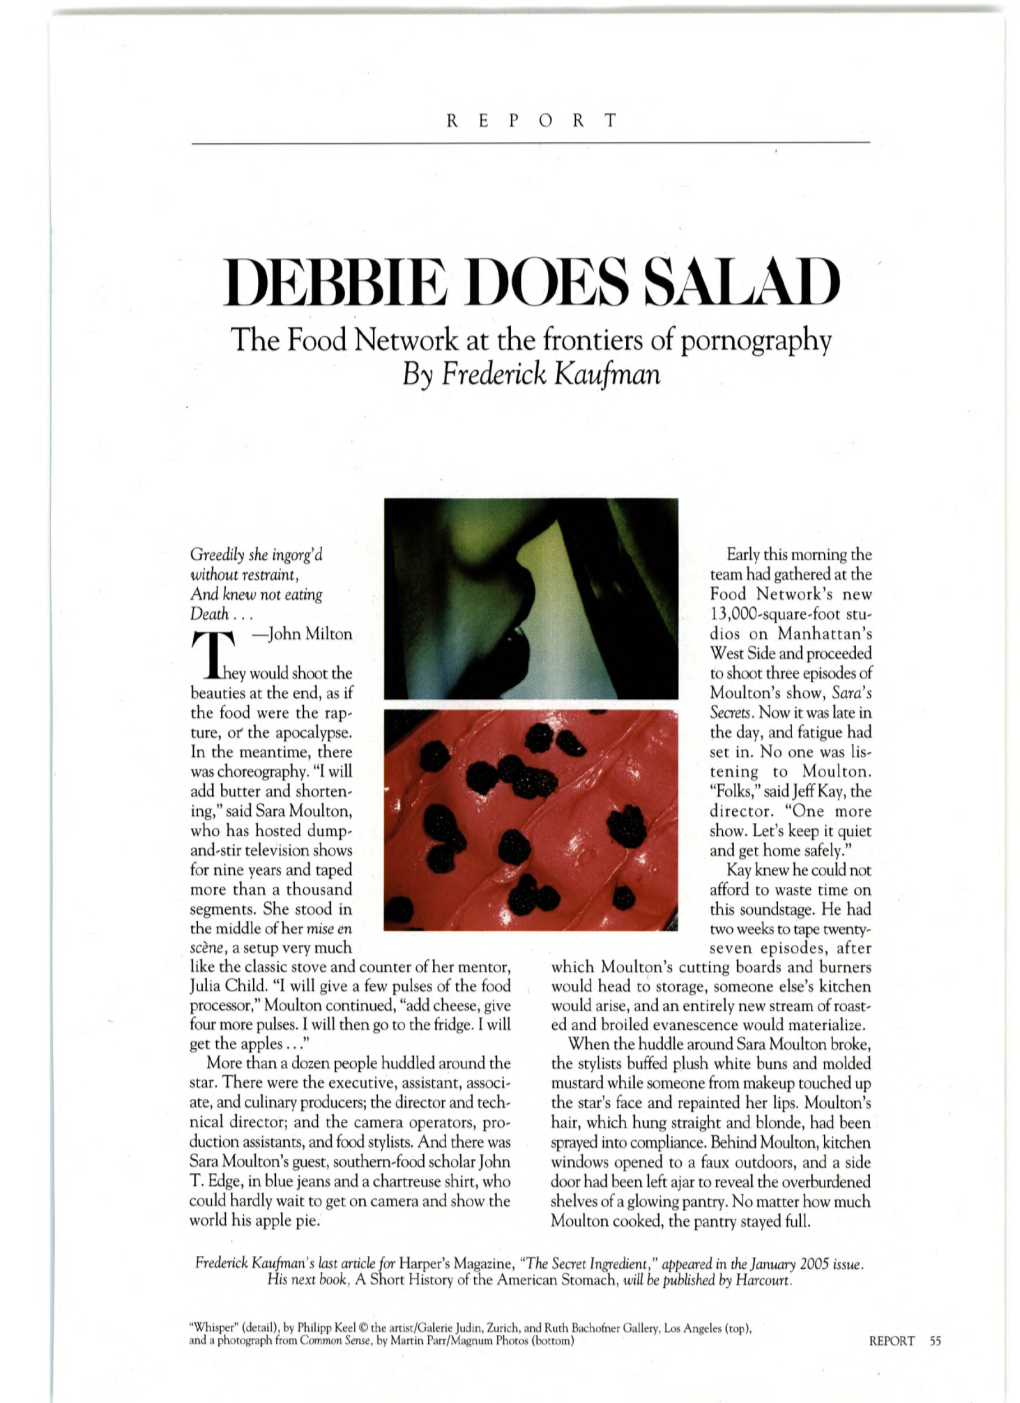 DEBBIE DOES SALAD the Food Network at the Frontiers of Pornography by Frederick Kaufman